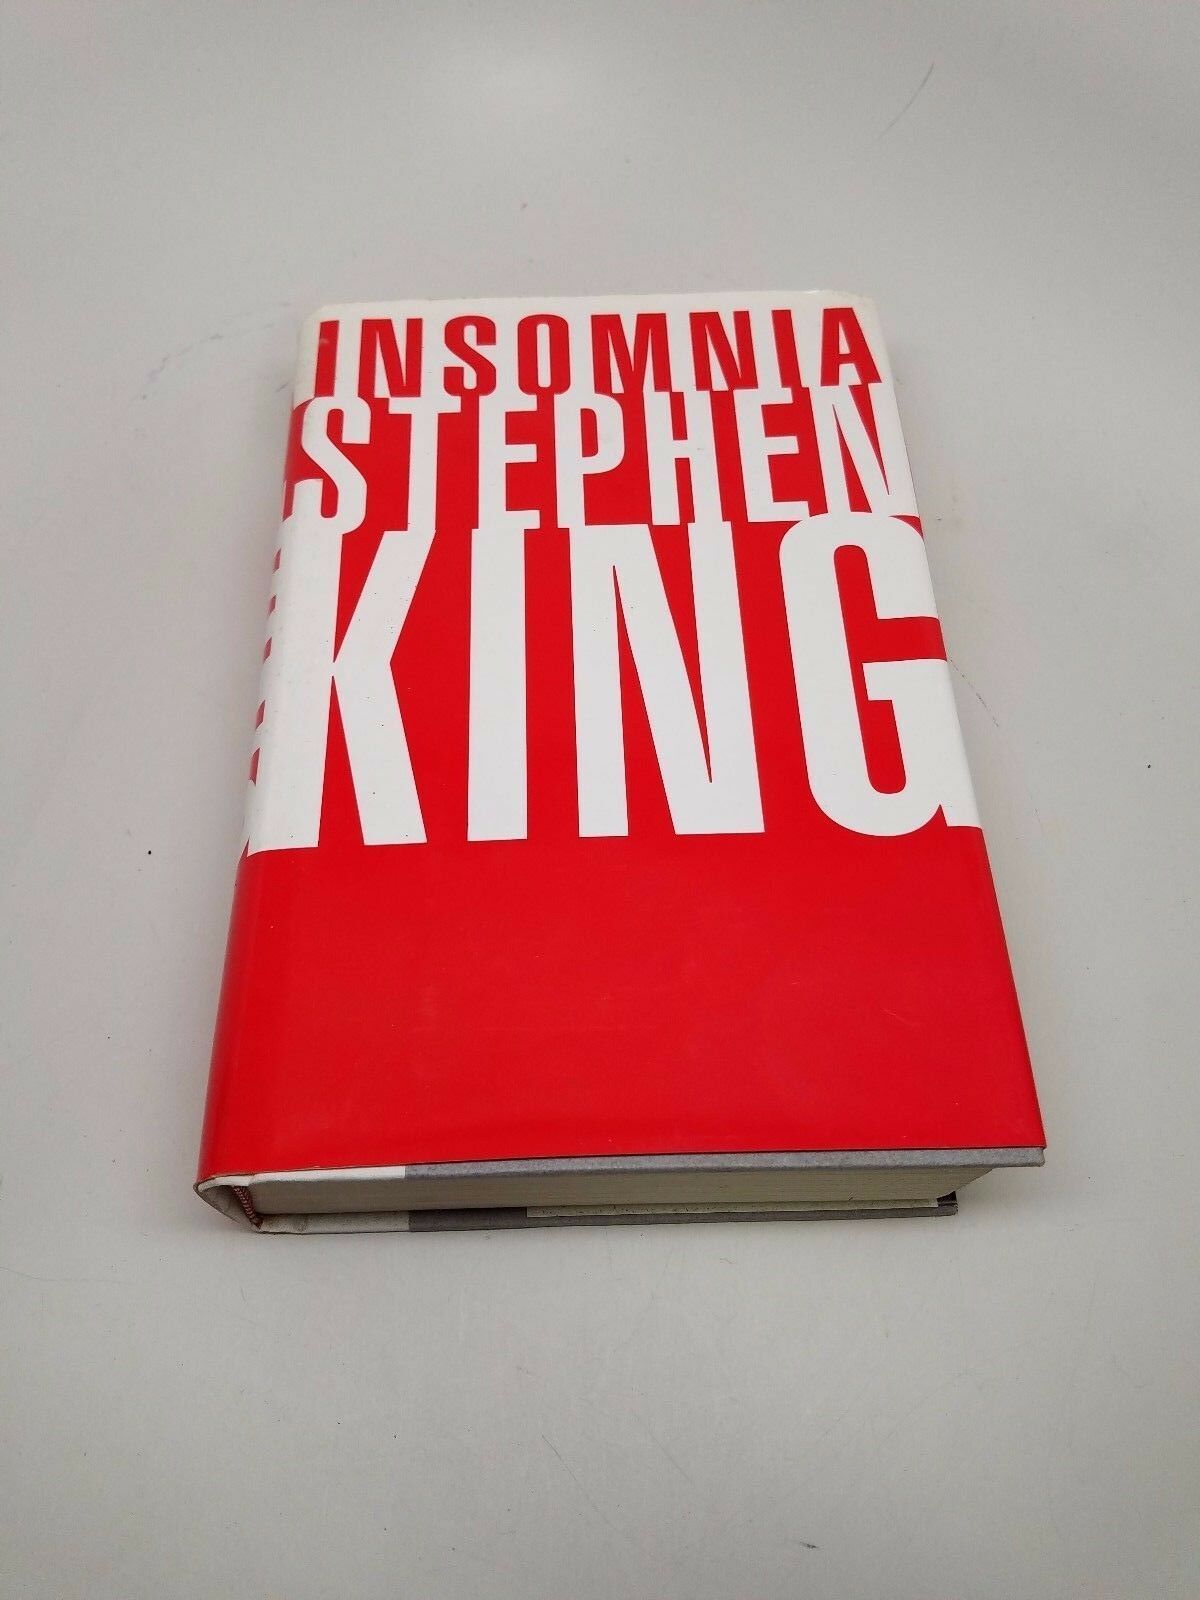 insomnia stephen king in book quotes